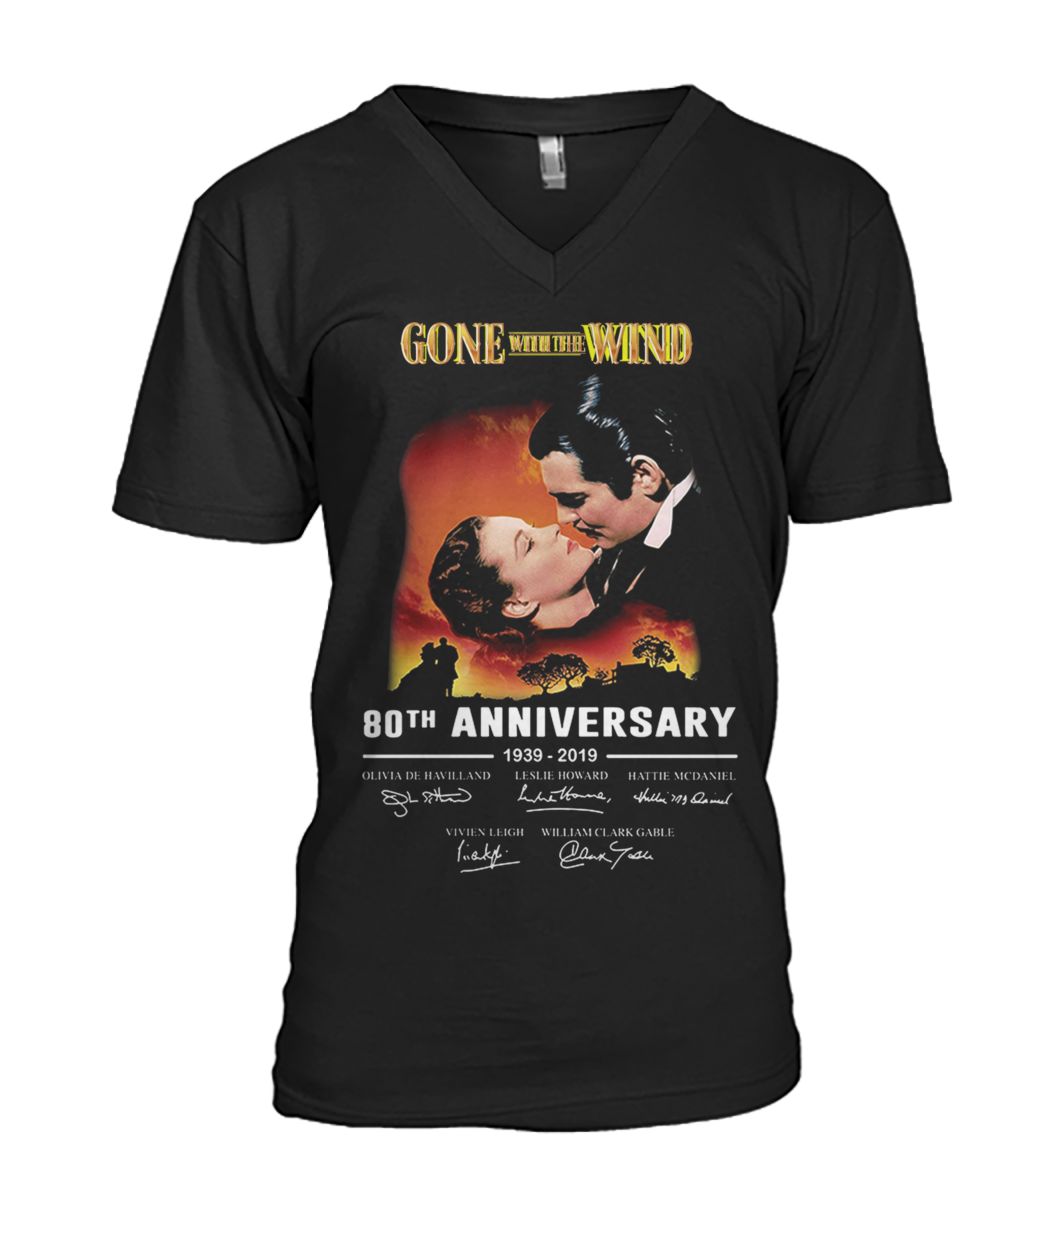 Gone with the wind 80th anniversary 1939 2019 signatures mens v-neck